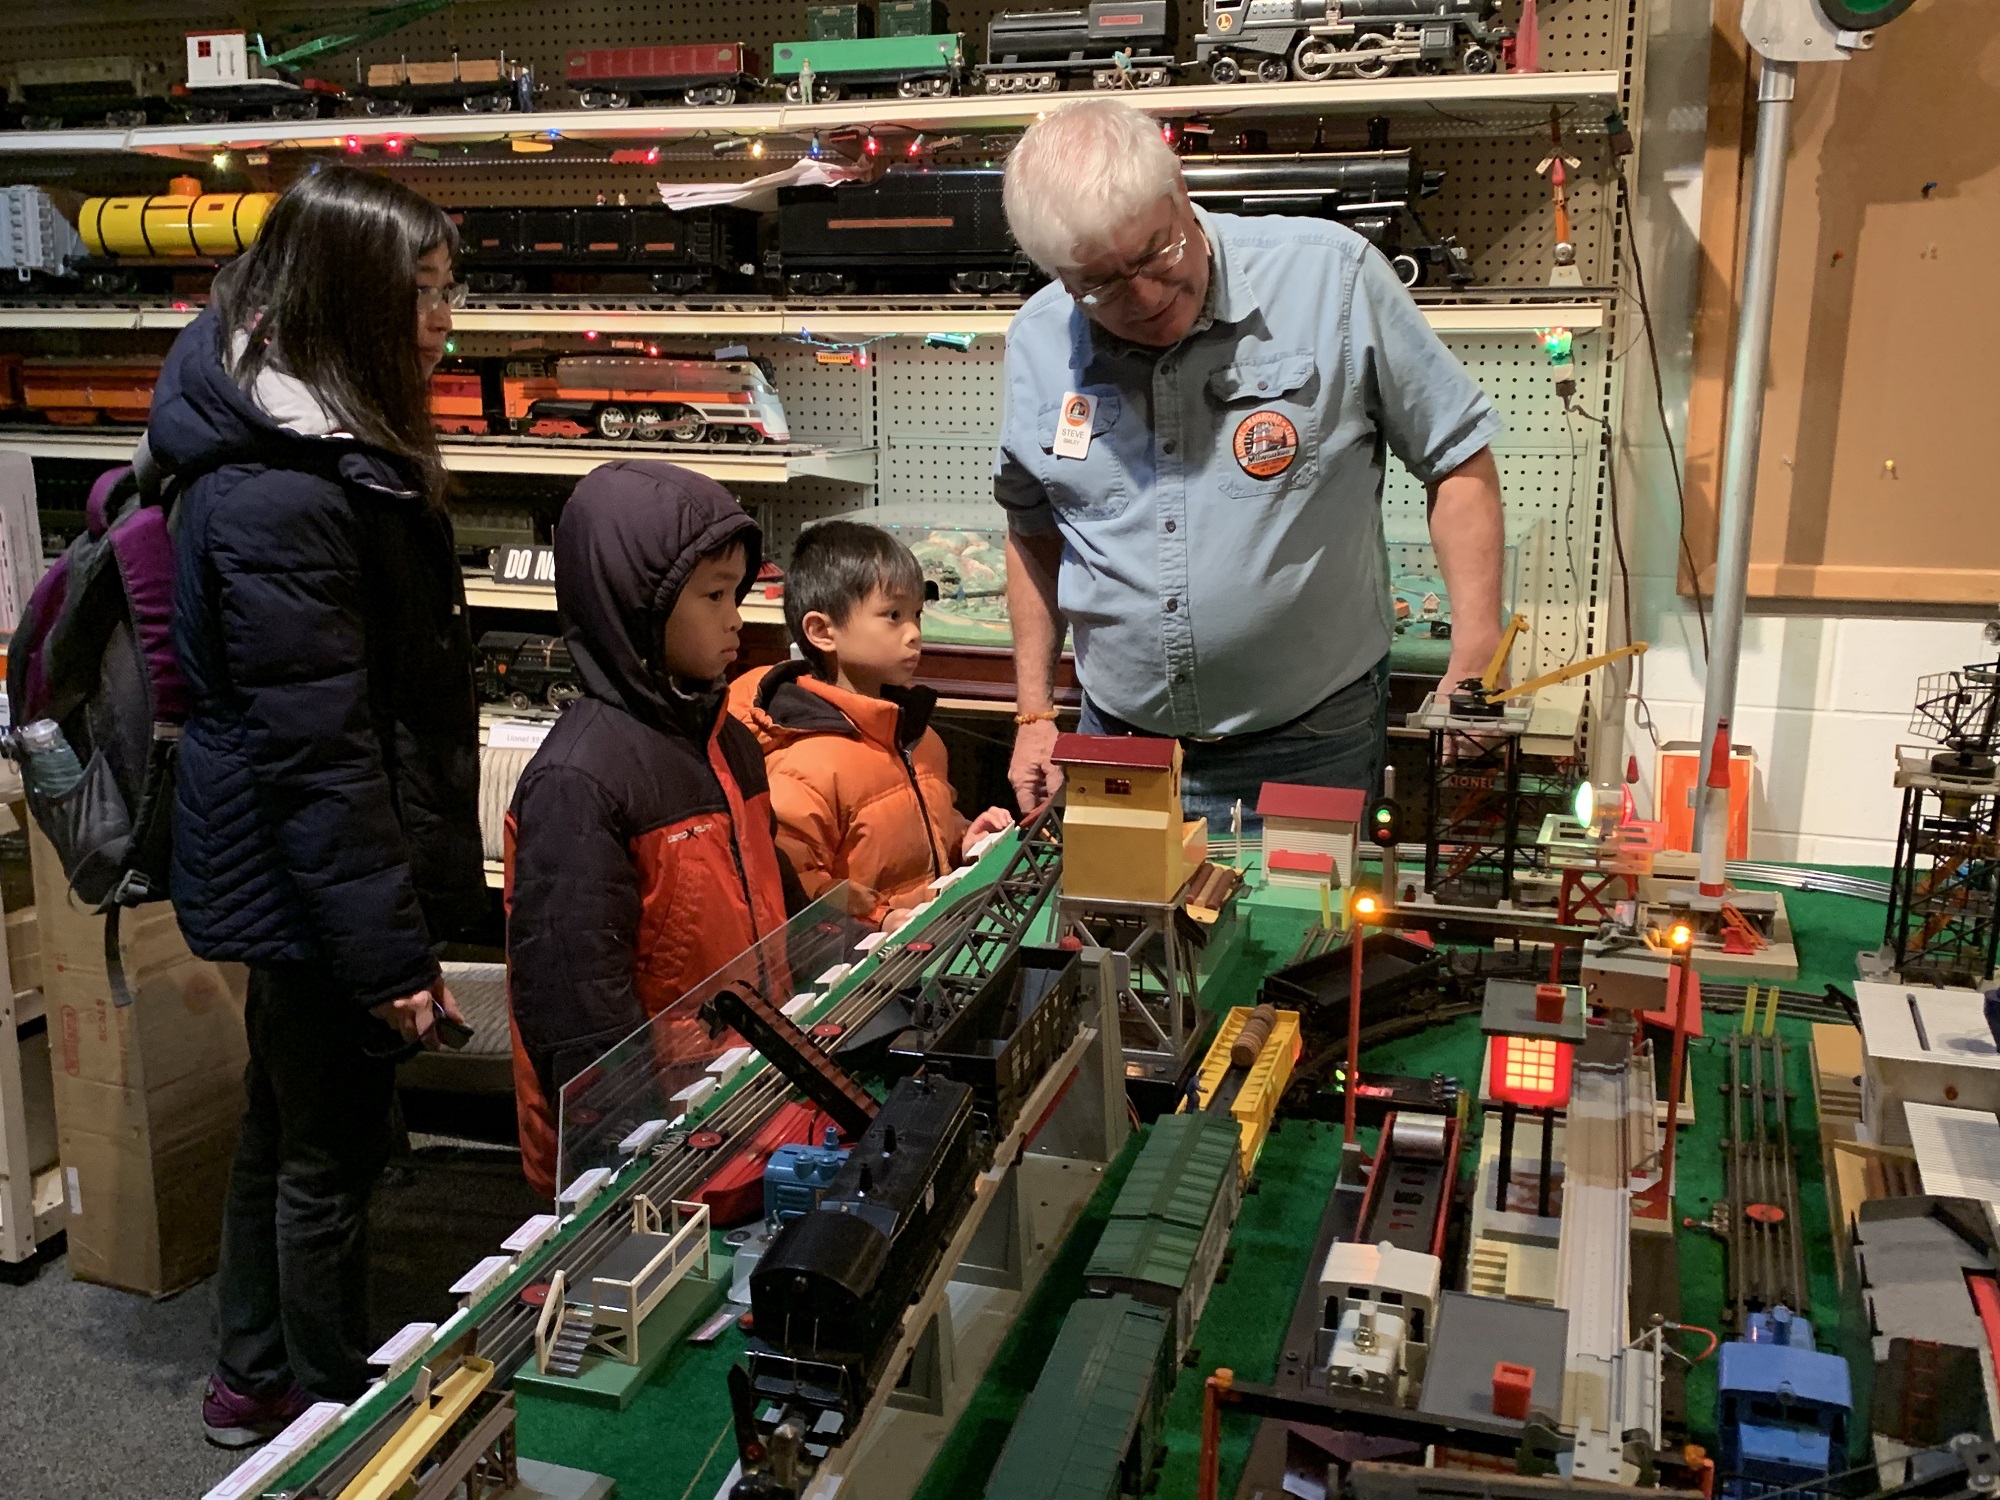 Lionel Railroad Club president Steve Smiley demonstrates the train setup for a family from New Berlin. (Photo by Jane Hampden)